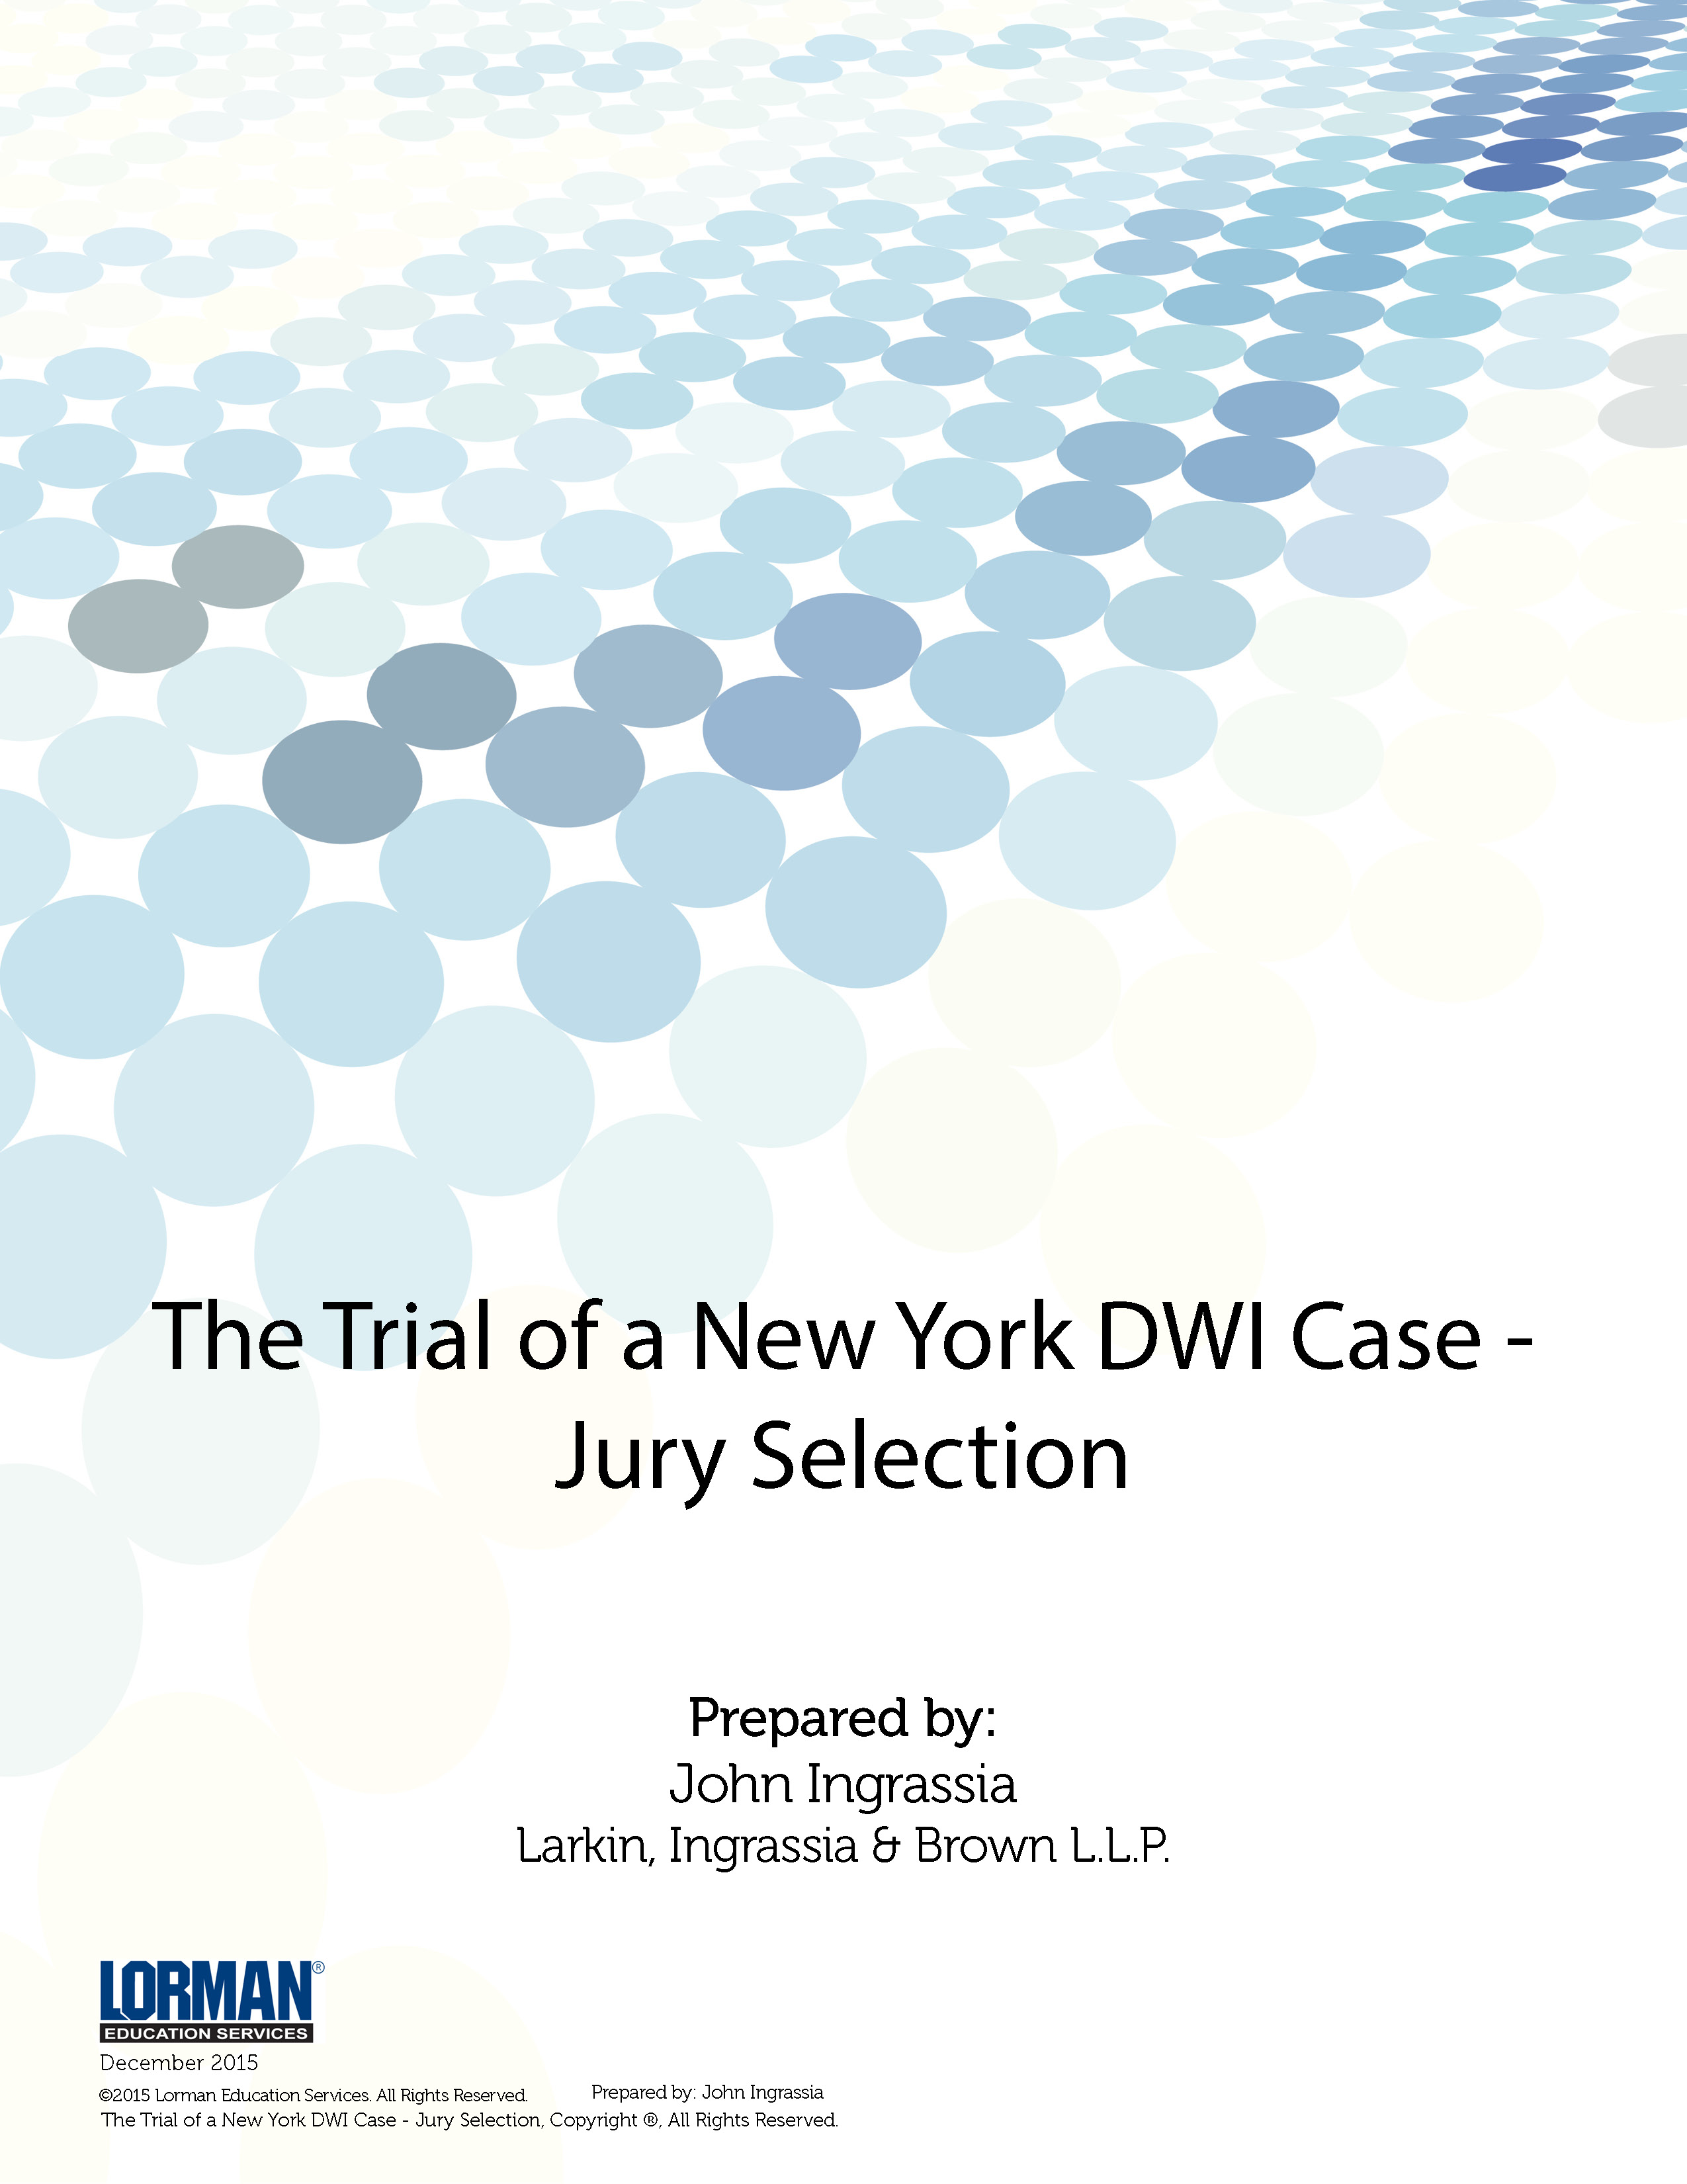 The Trial of a New York DWI Case - Jury Selection